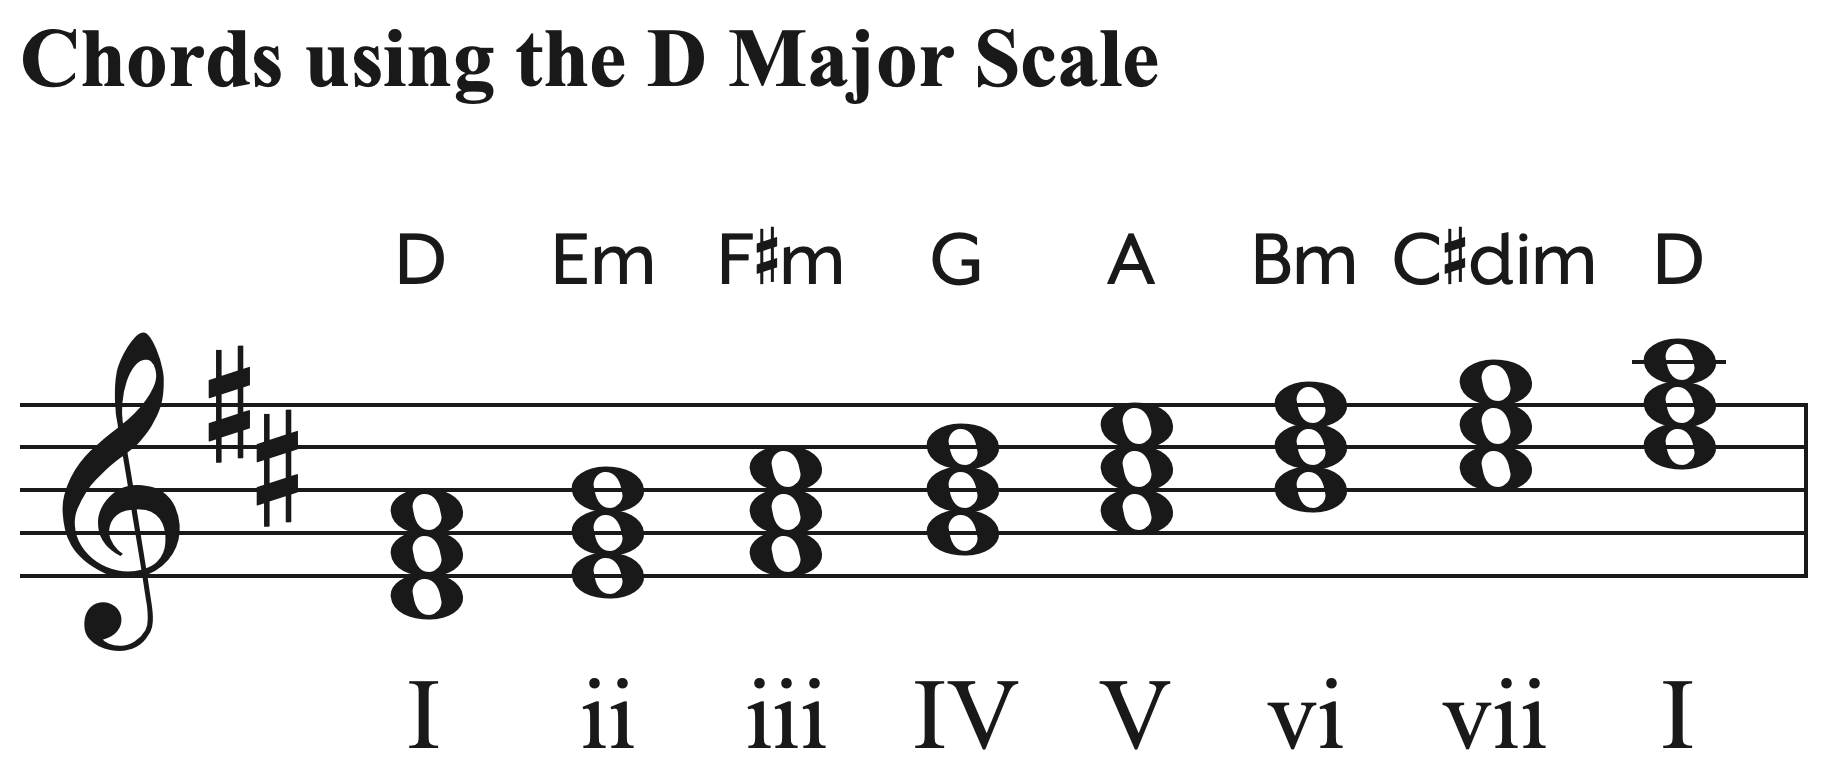 Chords using the D major scale